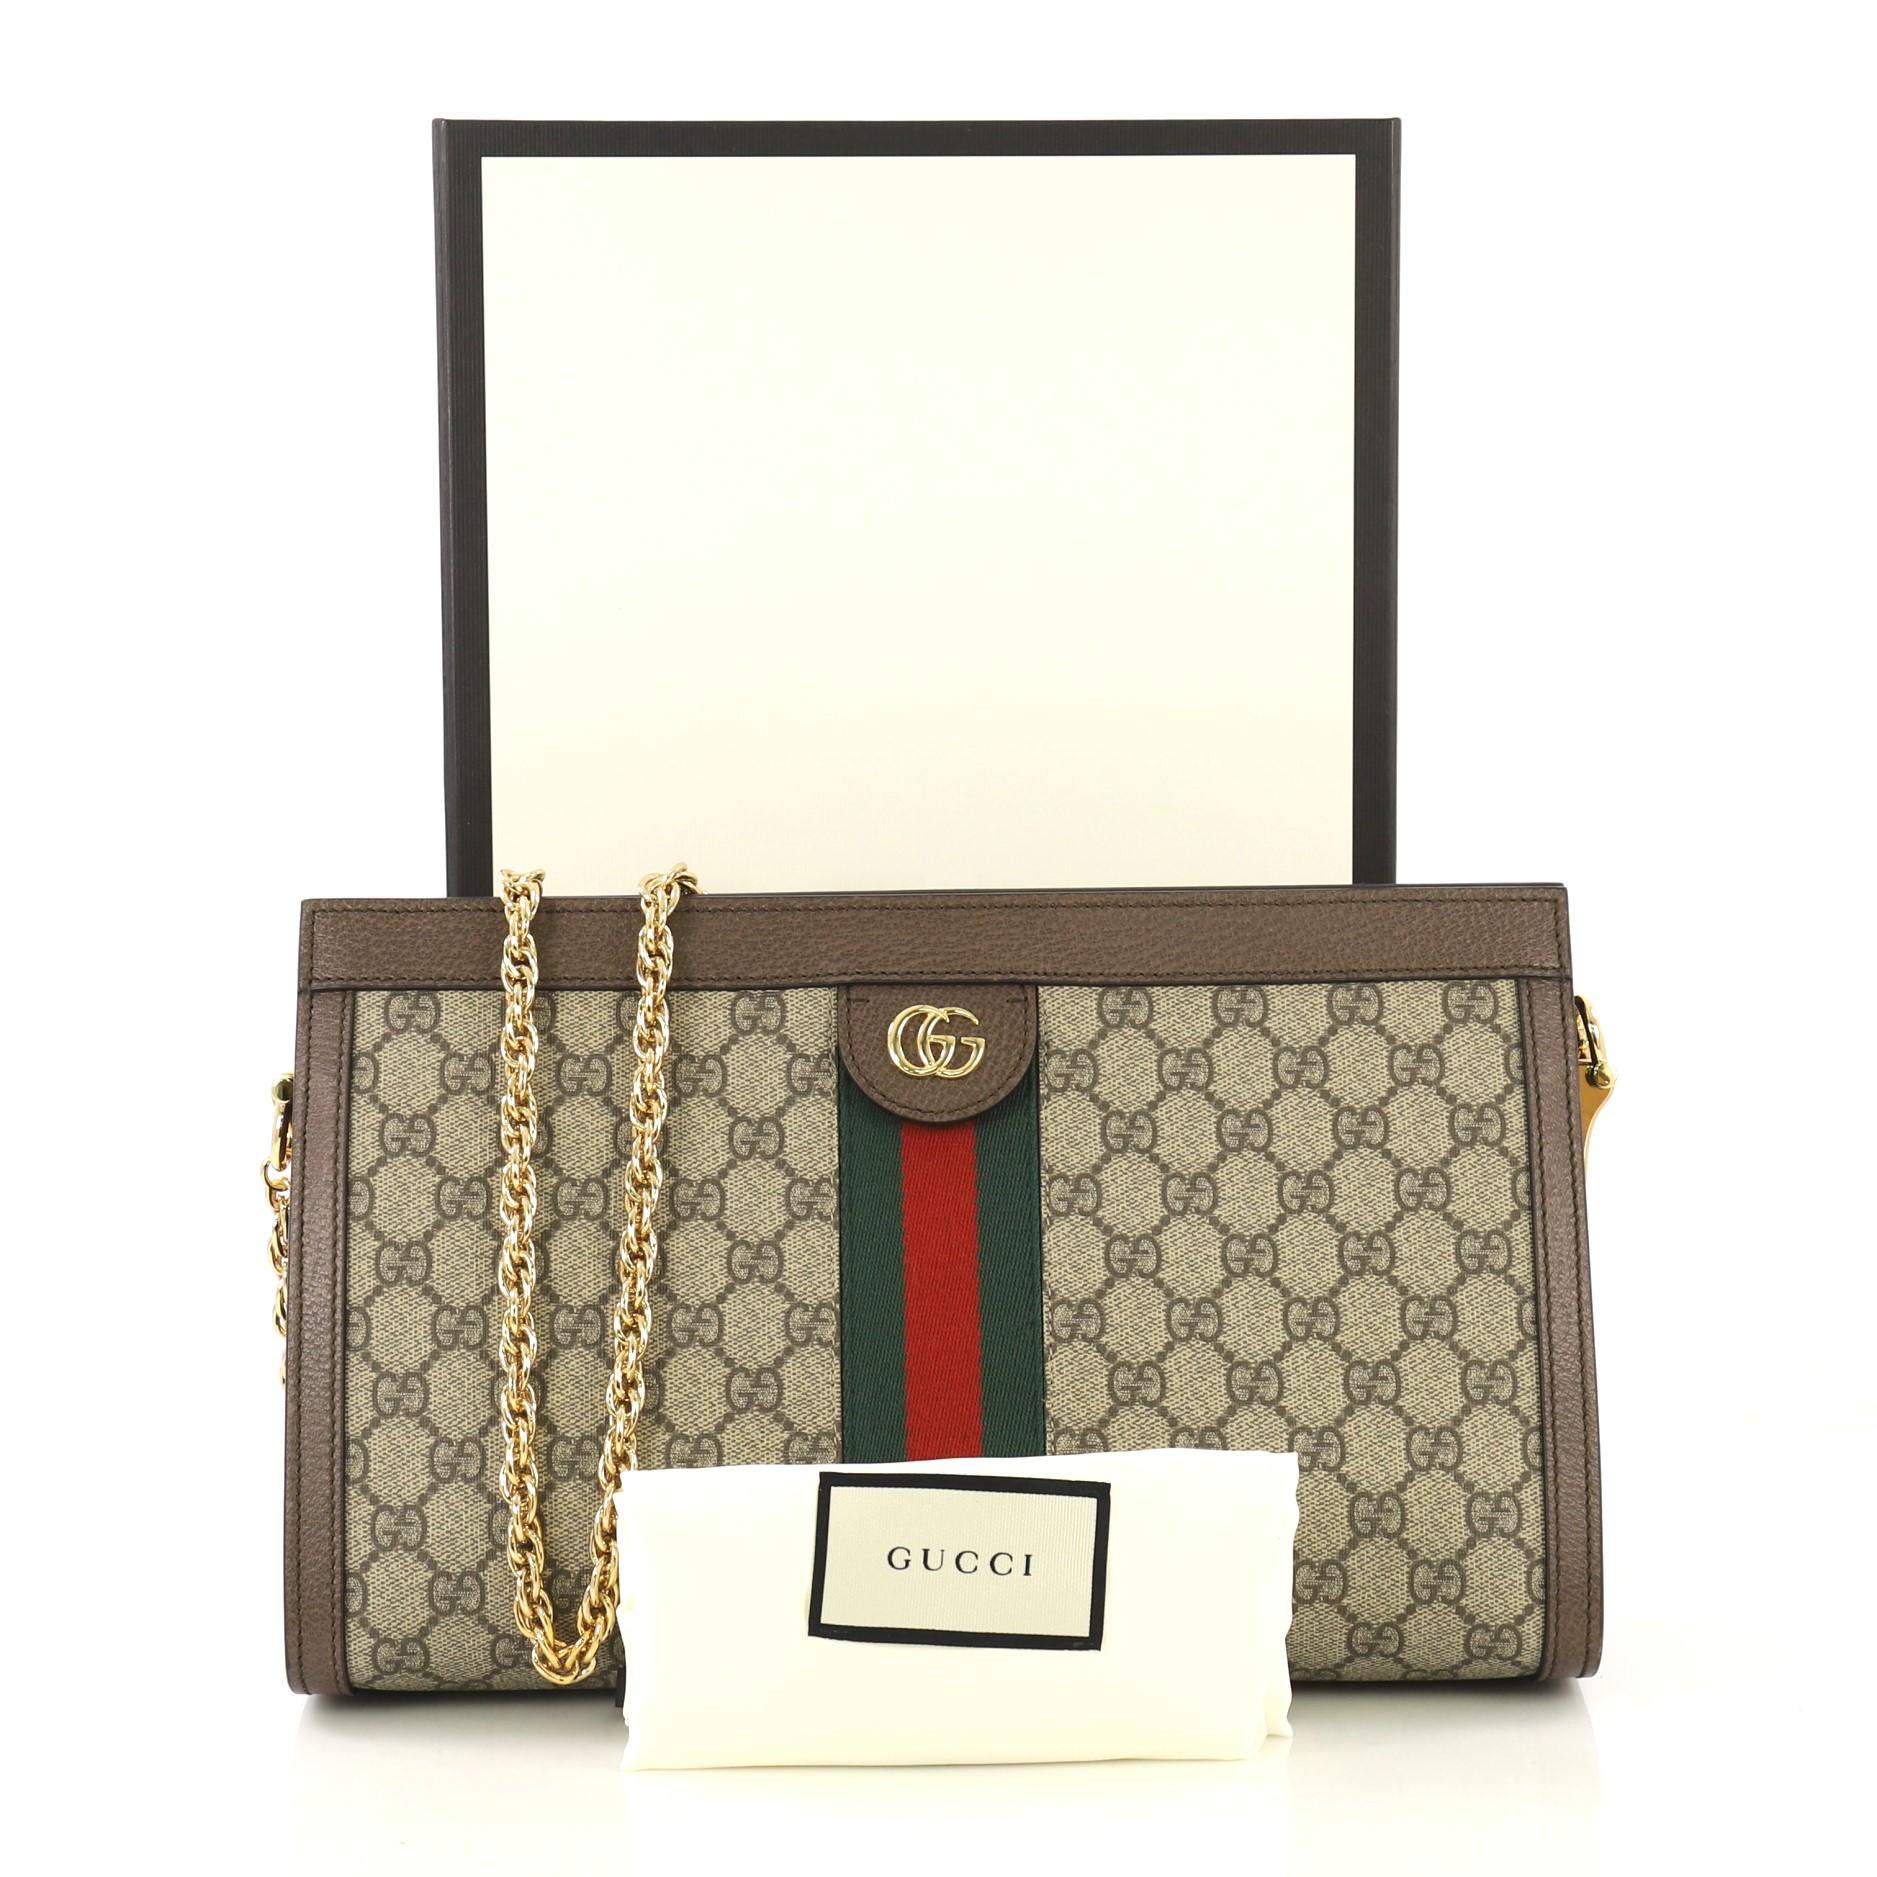 This Gucci Ophidia Chain Shoulder Bag GG Coated Canvas Medium, crafted in brown GG coated canvas, features inlaid web stripe detail, chain link shoulder strap, and gold-tone hardware. Its hidden magnetic snap closure opens to a blue satin interior